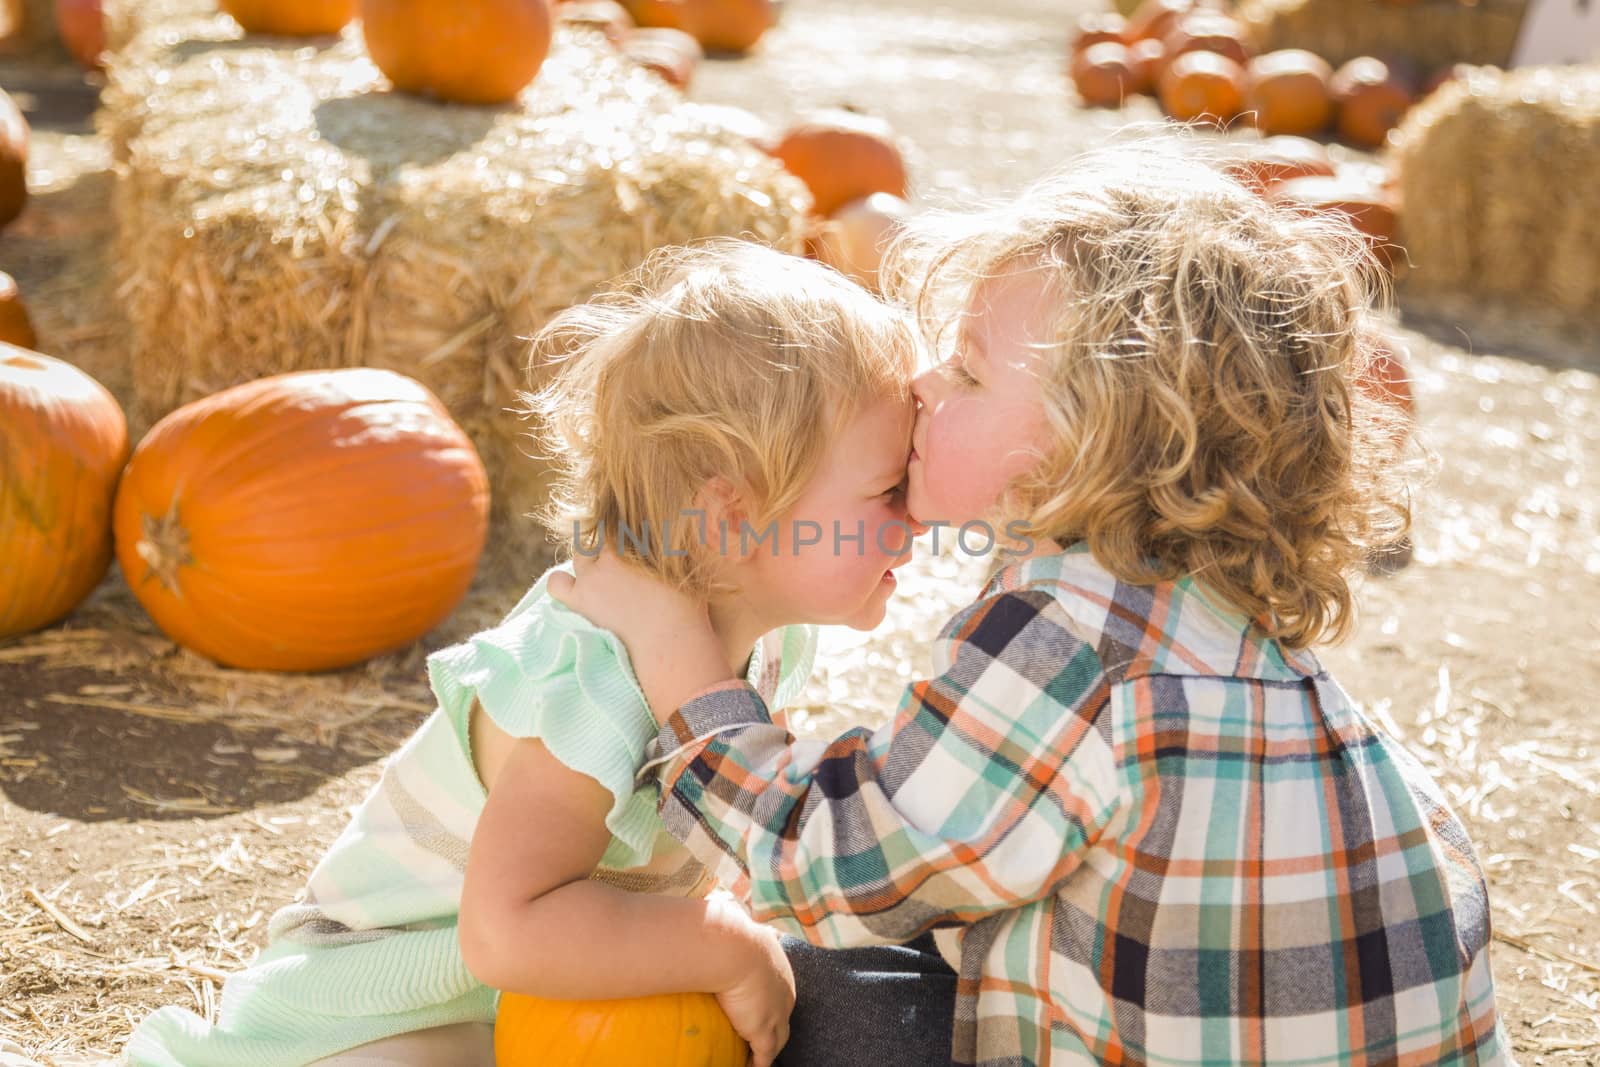 Sweet Little Boy Kisses His Baby Sister at Pumpkin Patch
 by Feverpitched